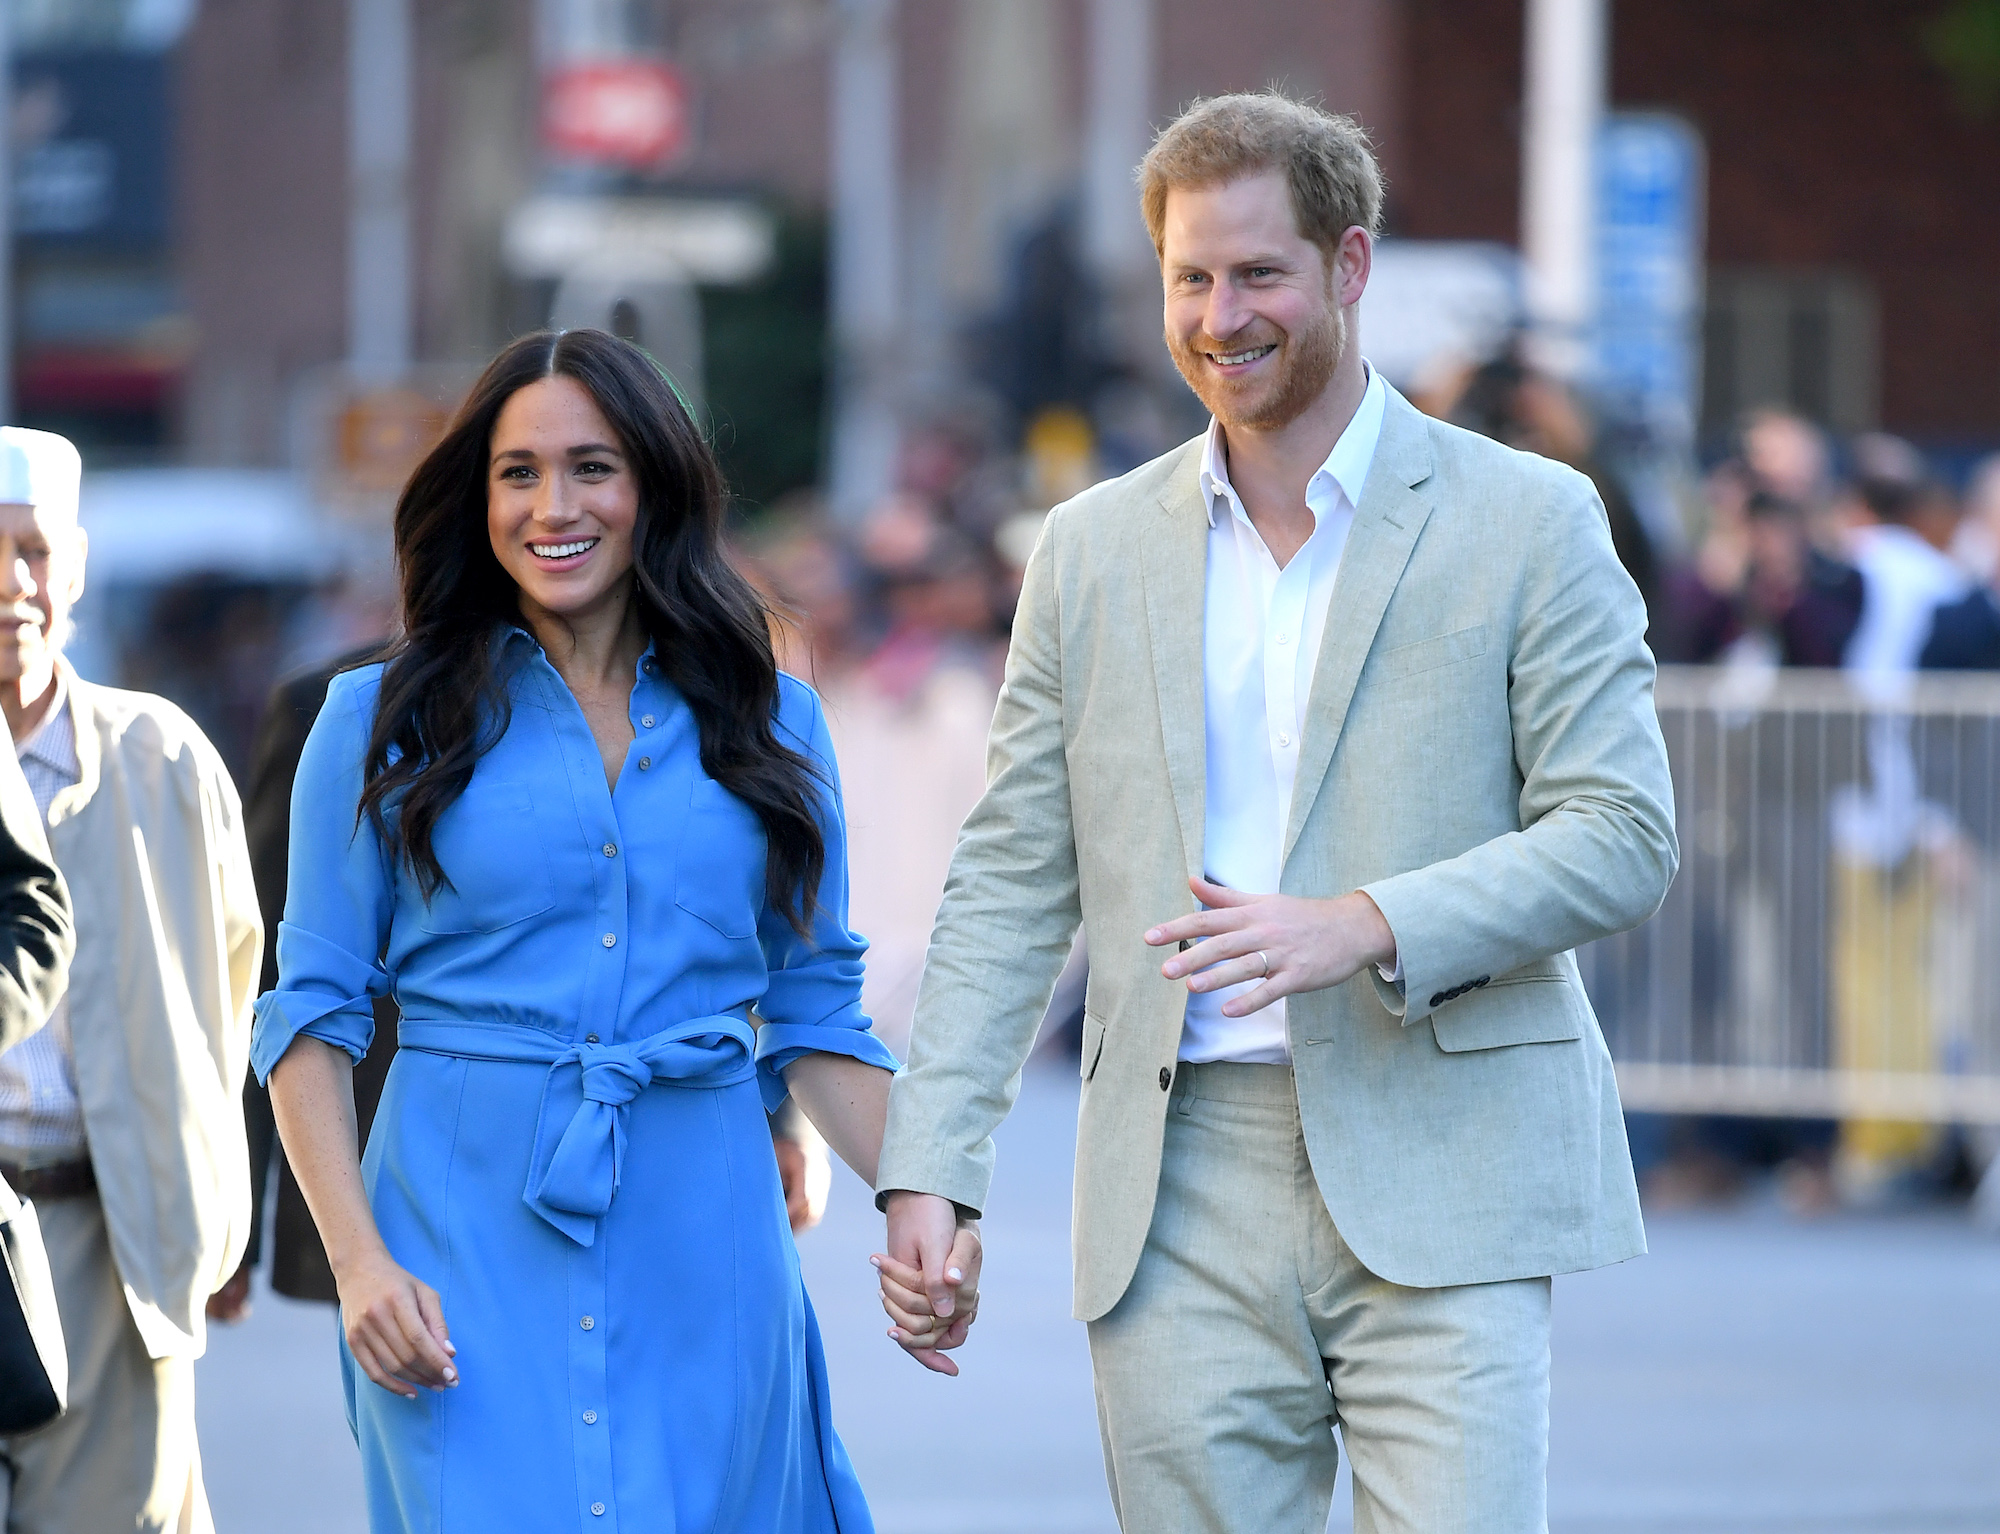 (L-R) Meghan Markle and Prince Harry smiling, walking down a street, holding hands